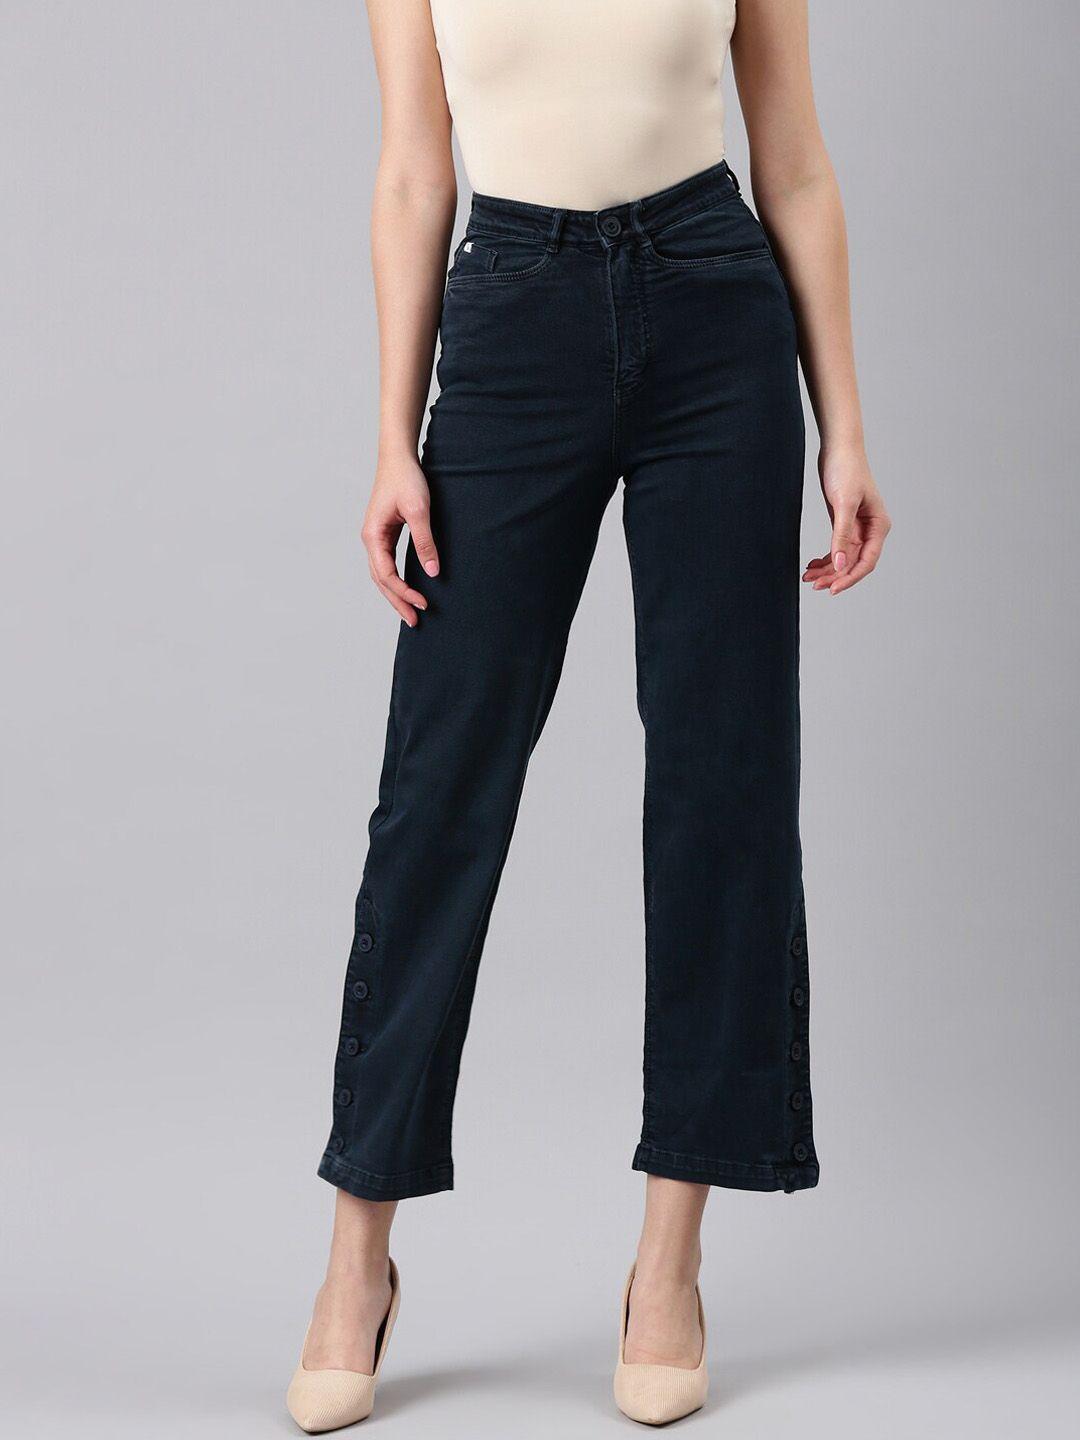 showoff women mid rise clean look straight fit stretchable jeans